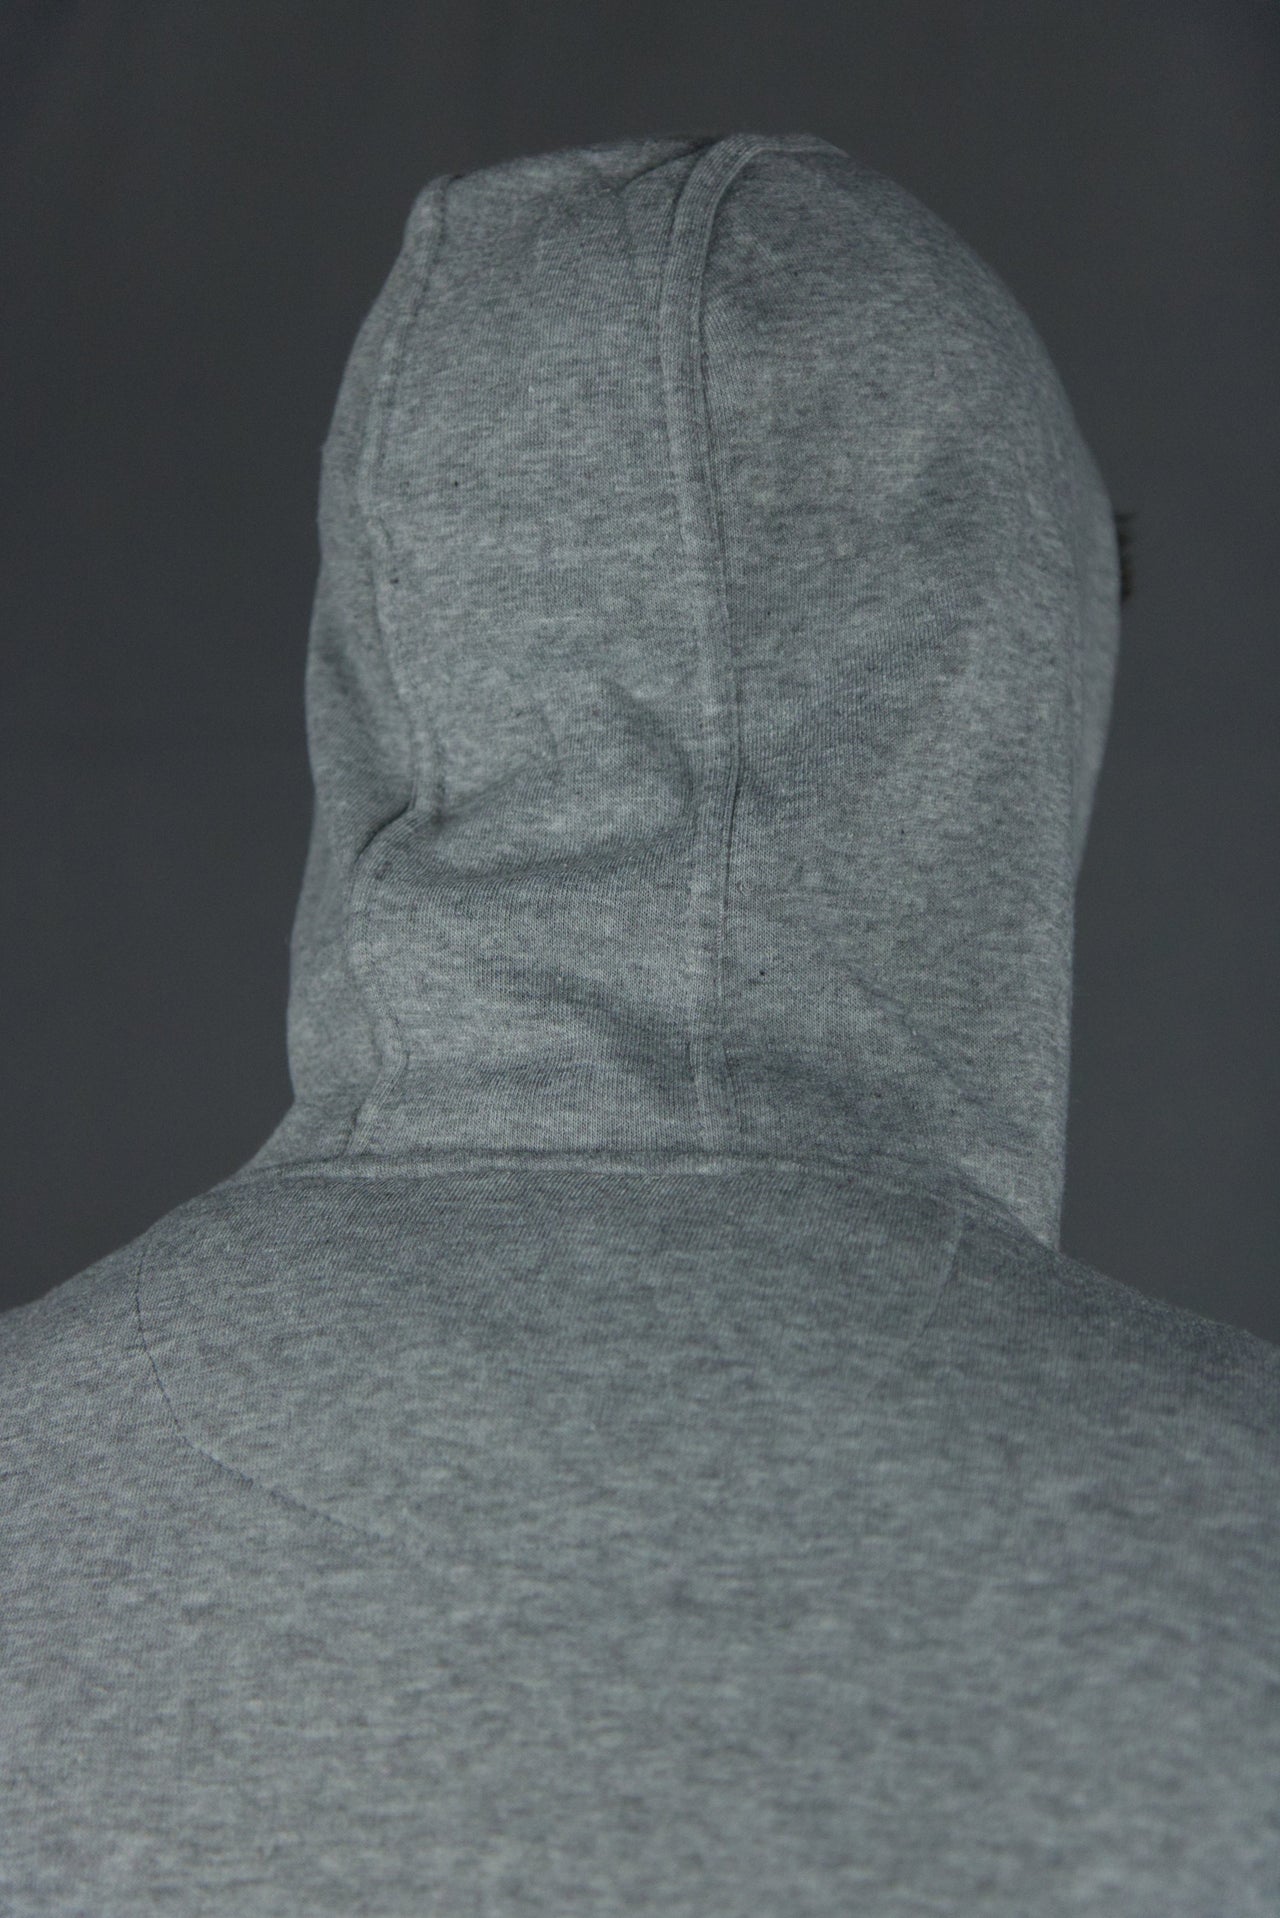 The three panel construction on the classic fleece heather gray pullover hoodie's hood allows for it to sit comfortably on the wearer's head